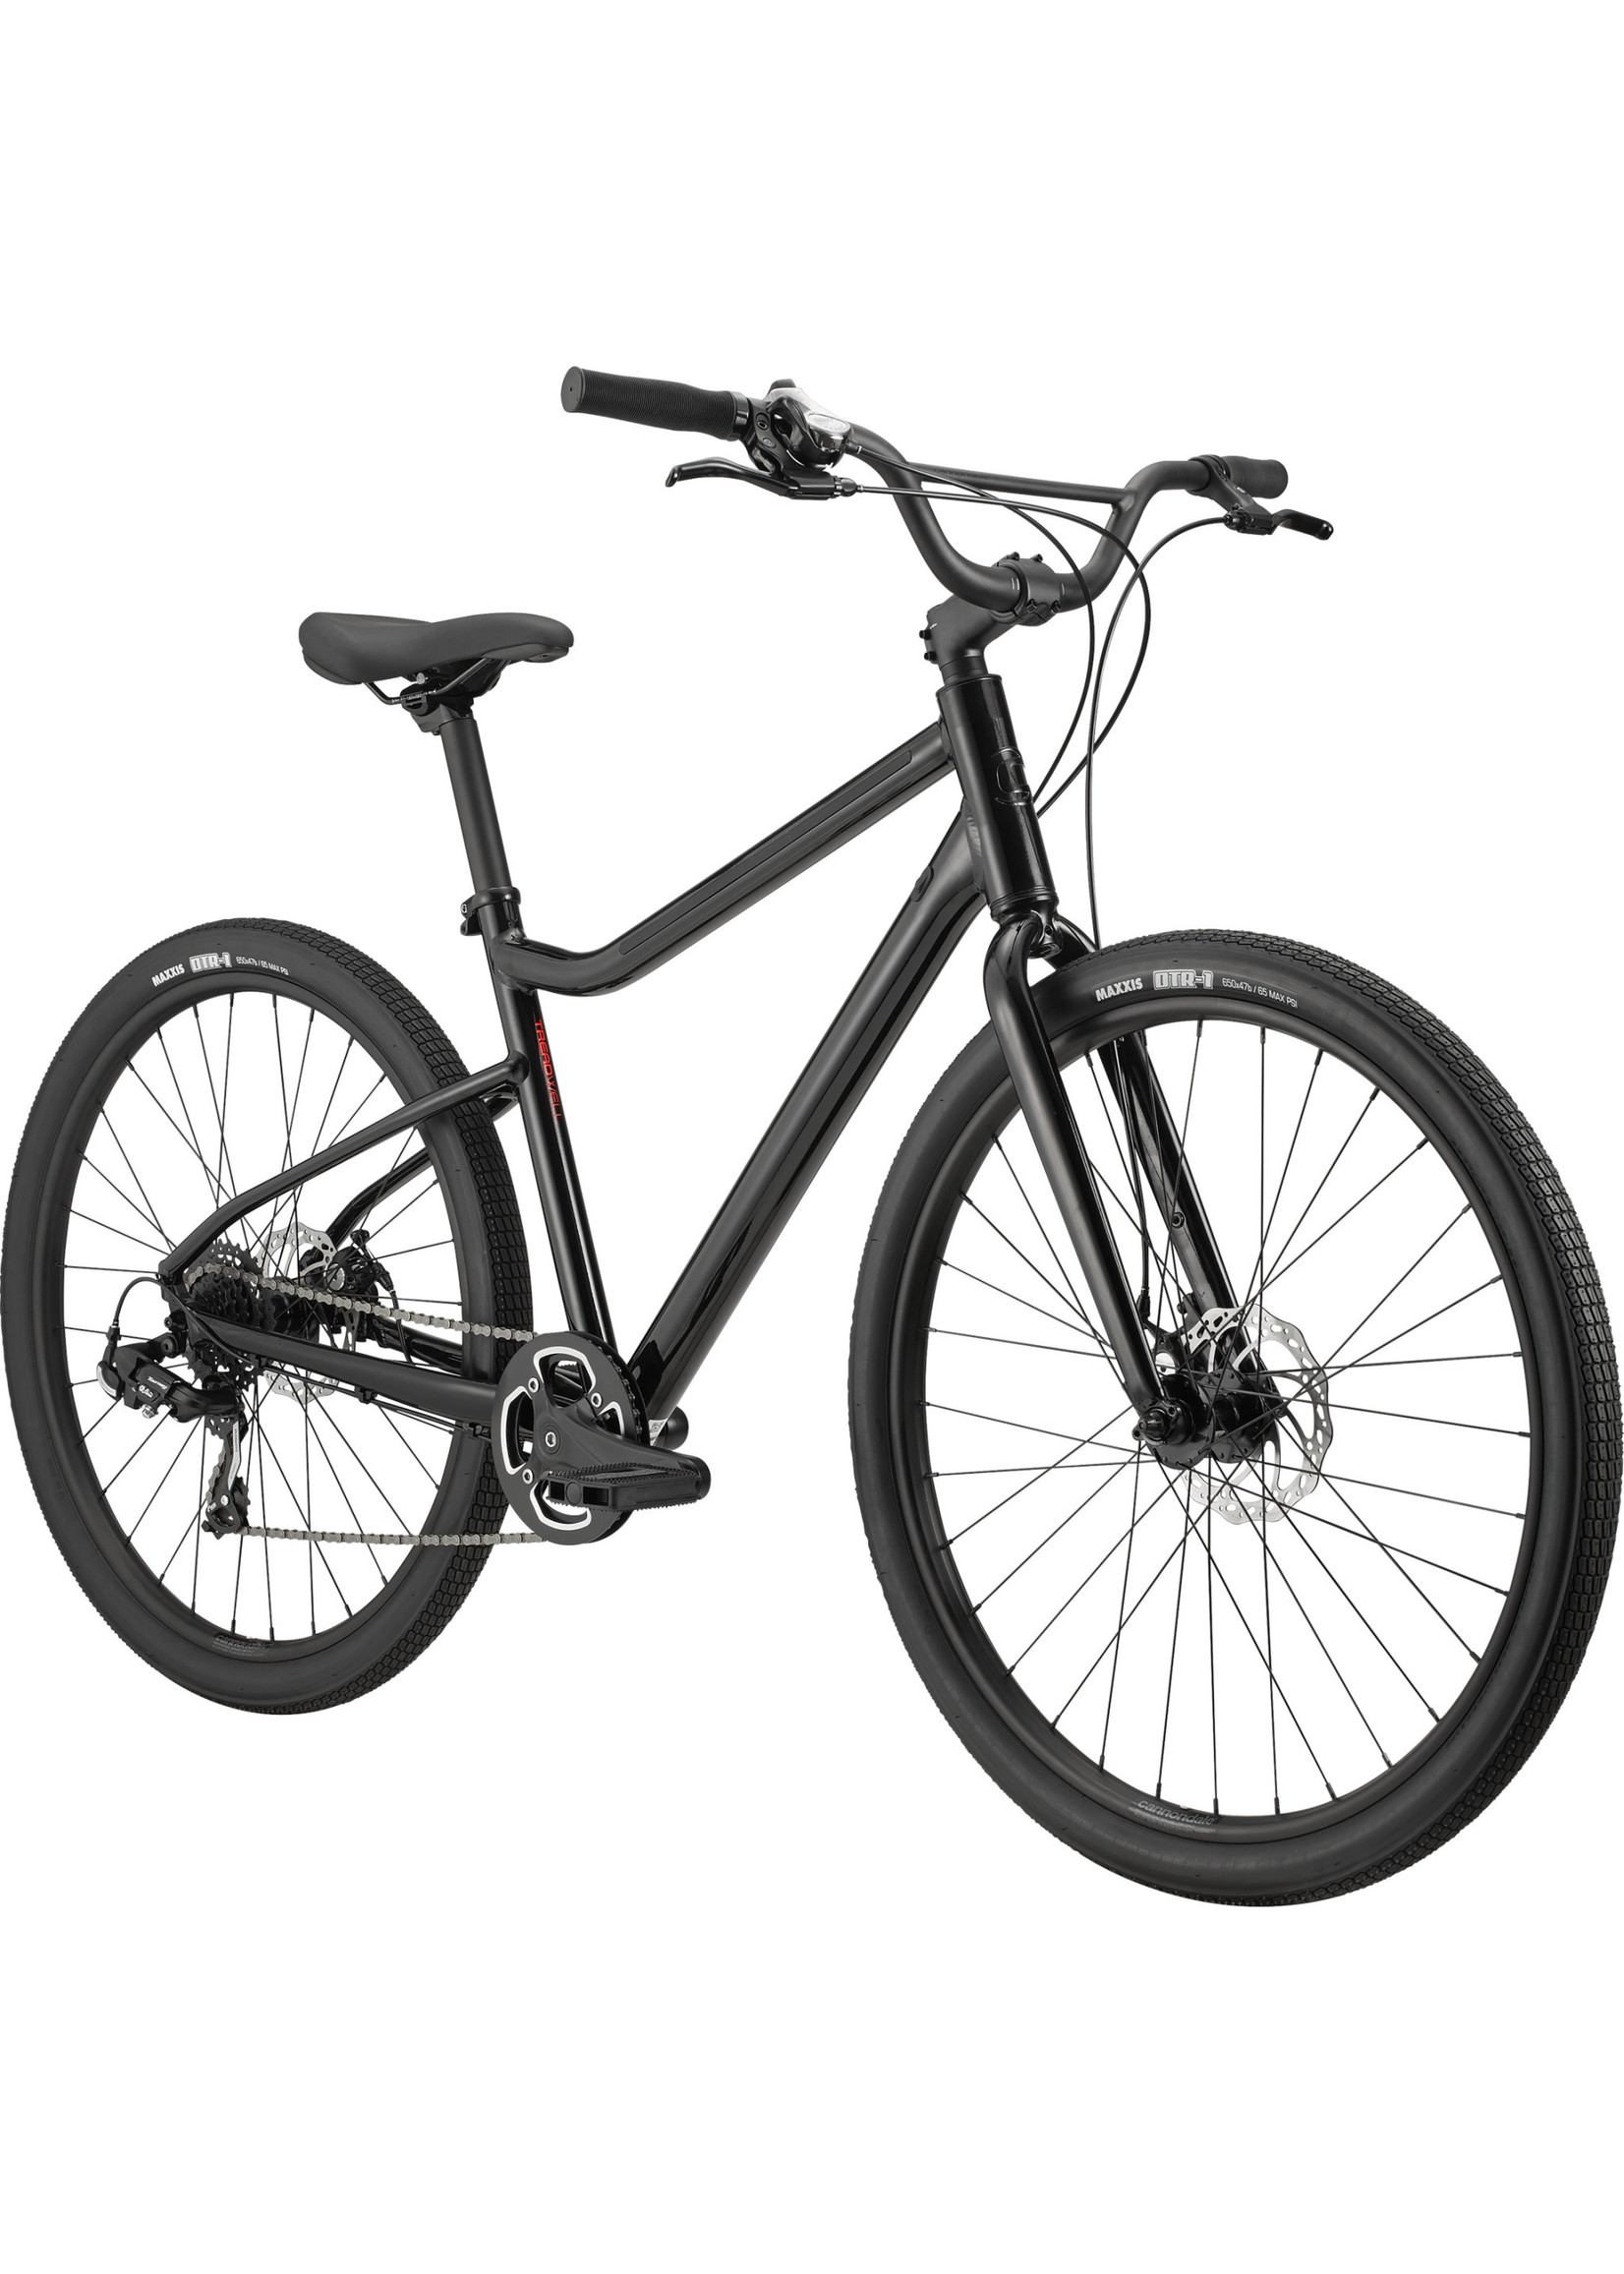 Cannondale Cannondale Treadwell 3, BLK MD - Black, Medium